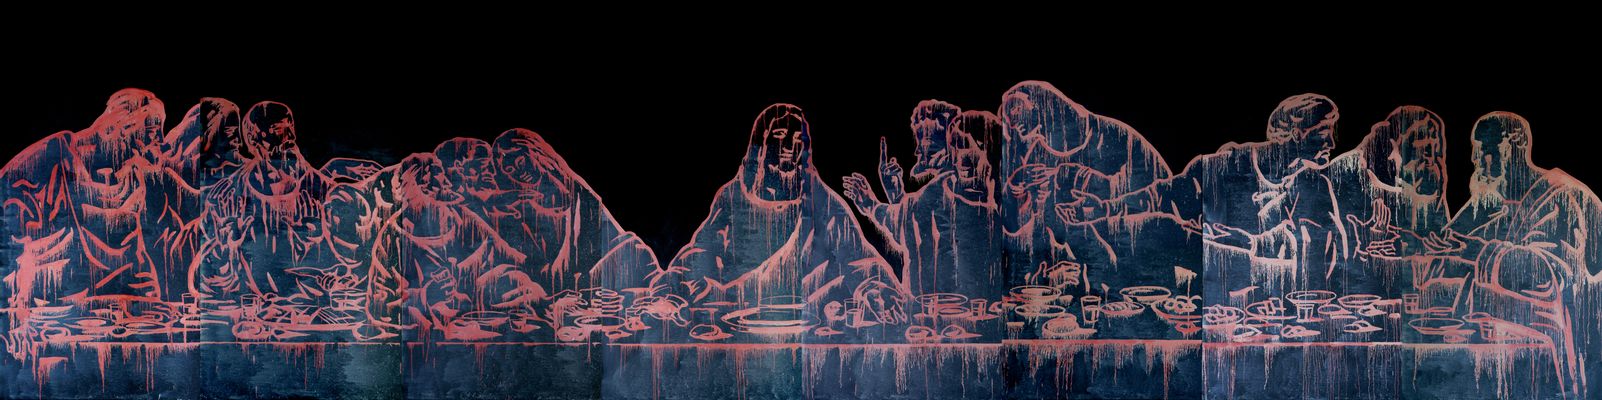 Wang Guangyi - The Last Supper (New Religion)